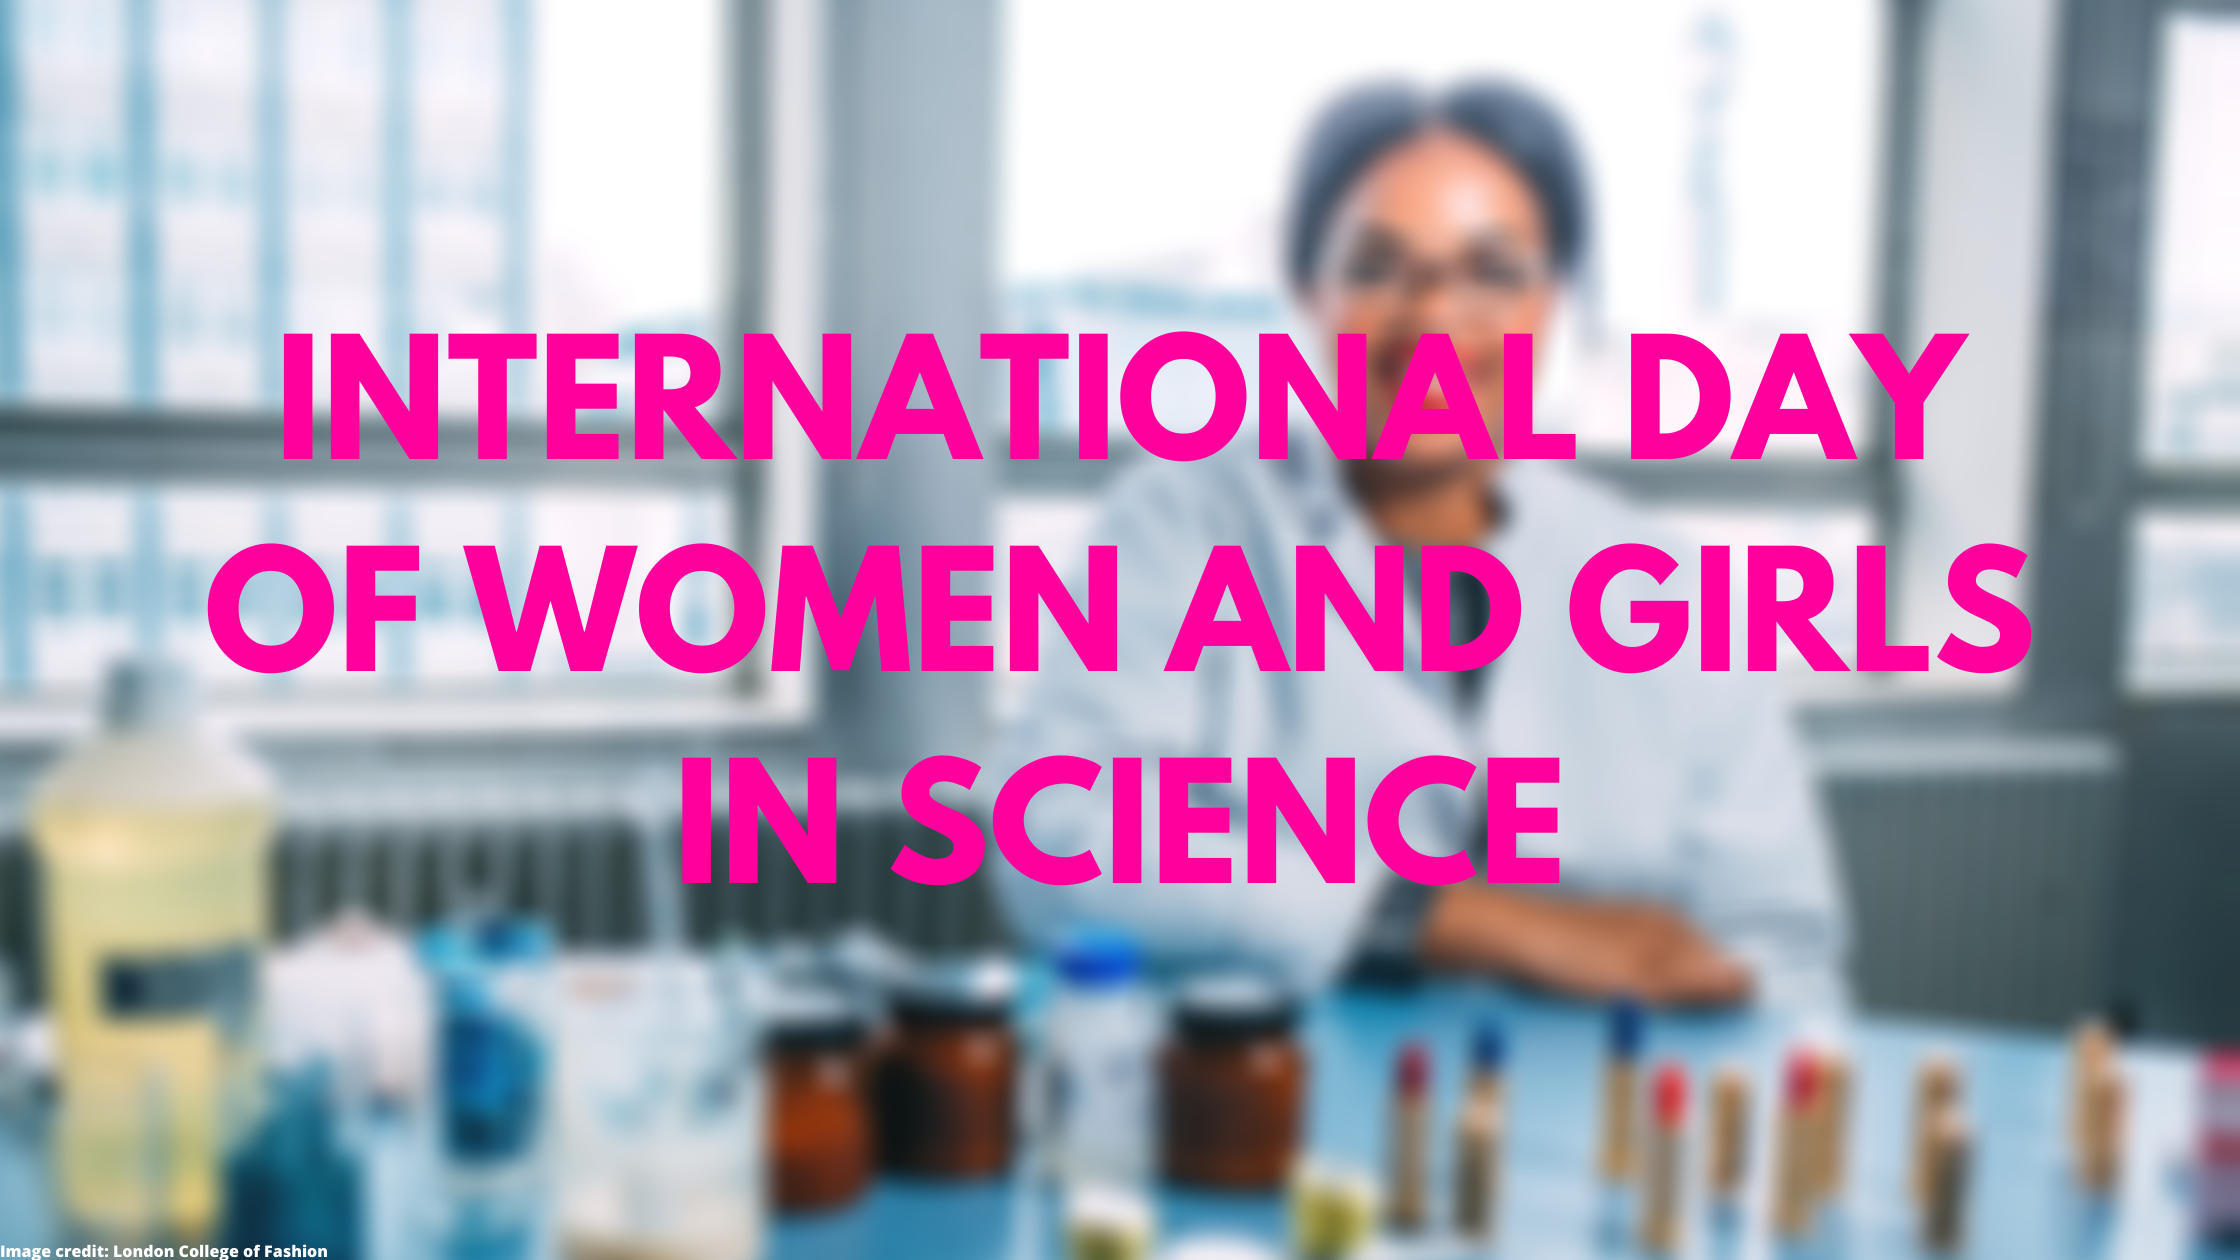 International Day of Women and Girls in Science: 11 February